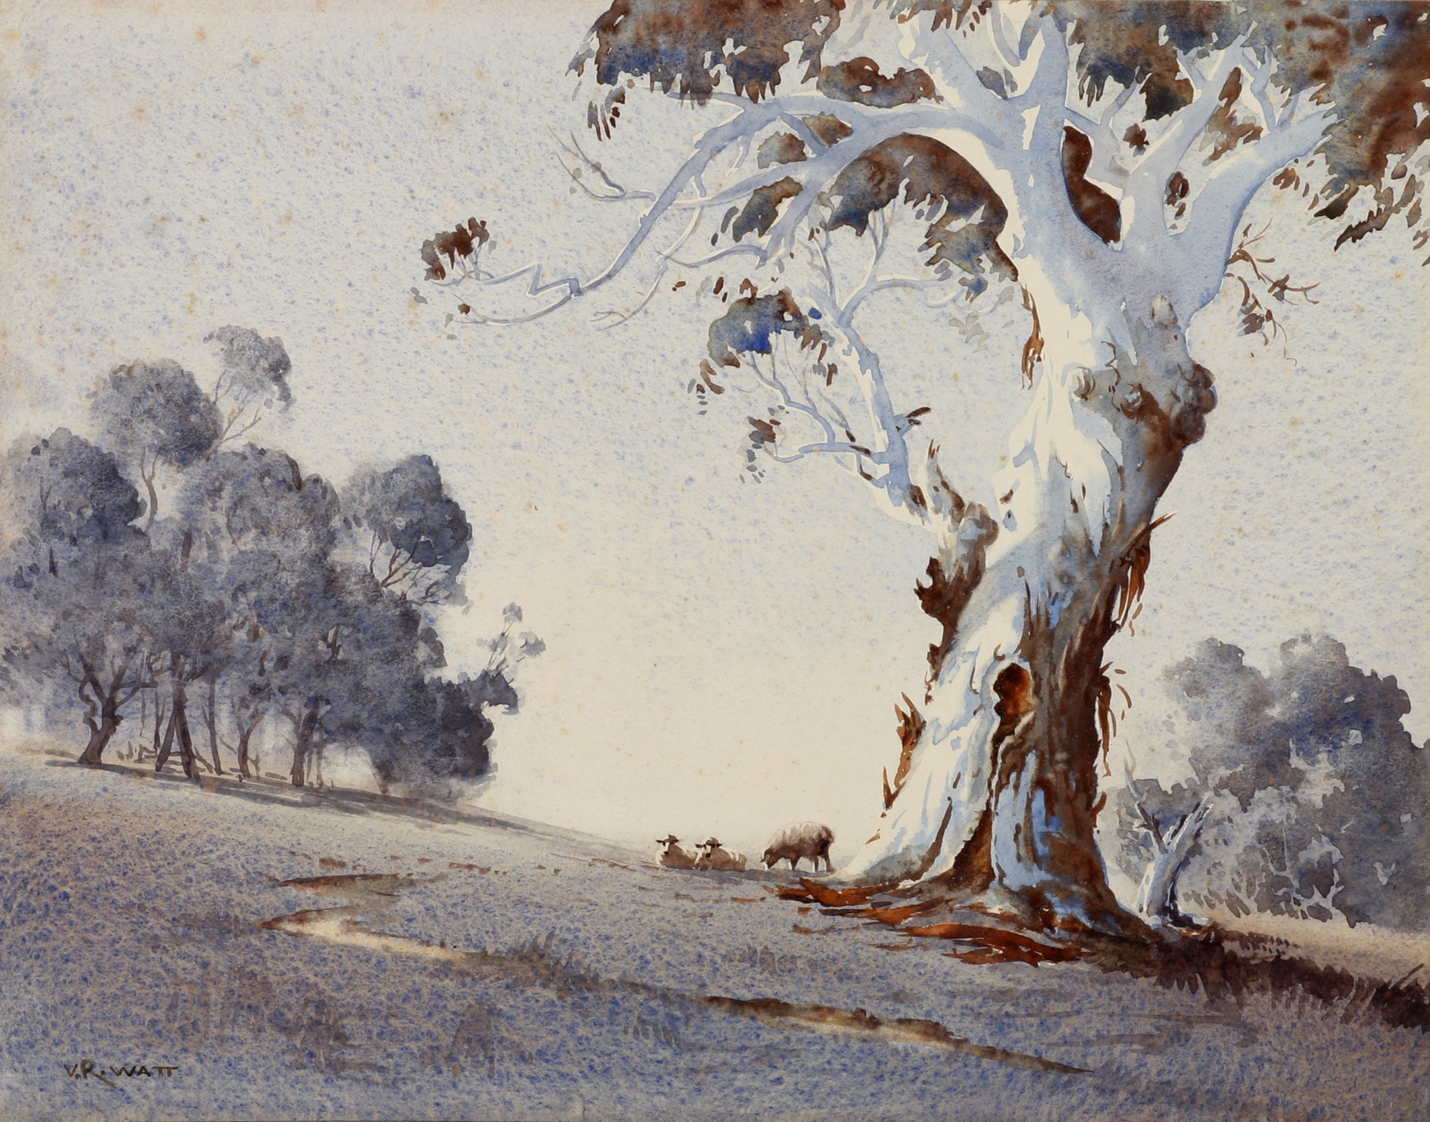 White Ghost Gum and Sheep. - Vintage Painting from 1935